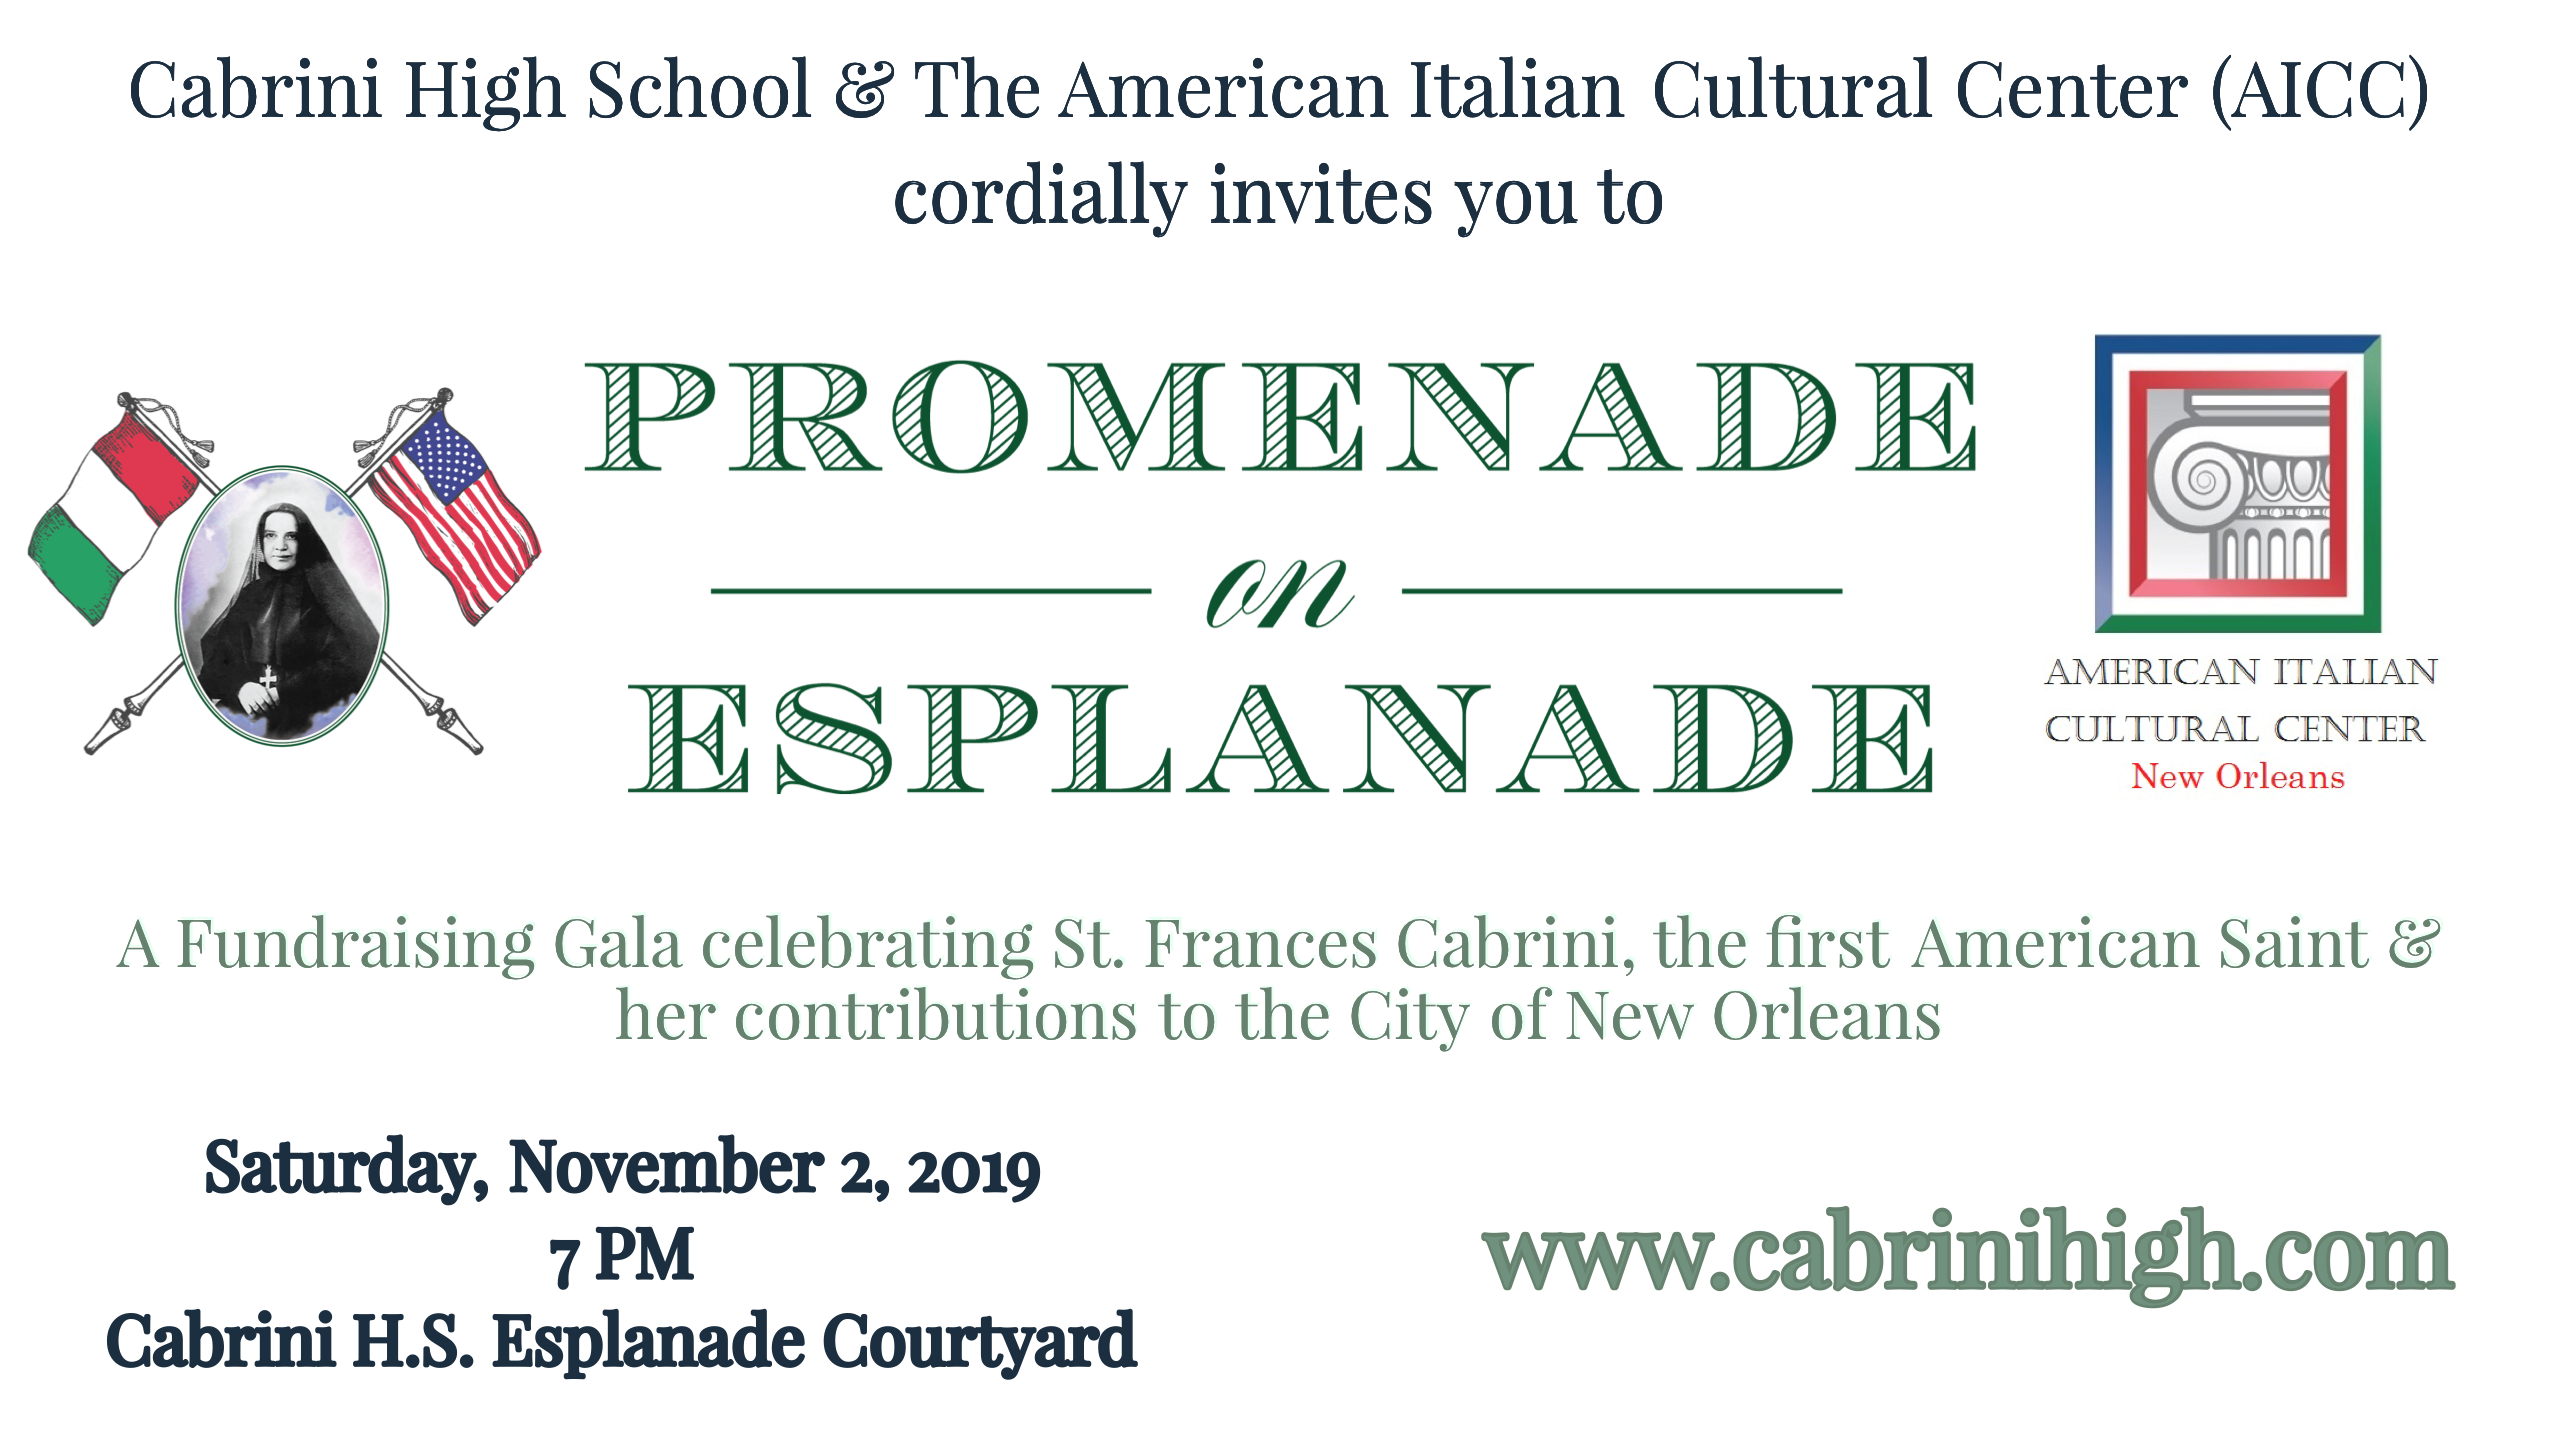 Cabrini High School and the American Italian Cultural Center Co-hosts Fundraising Gala in Honor of S